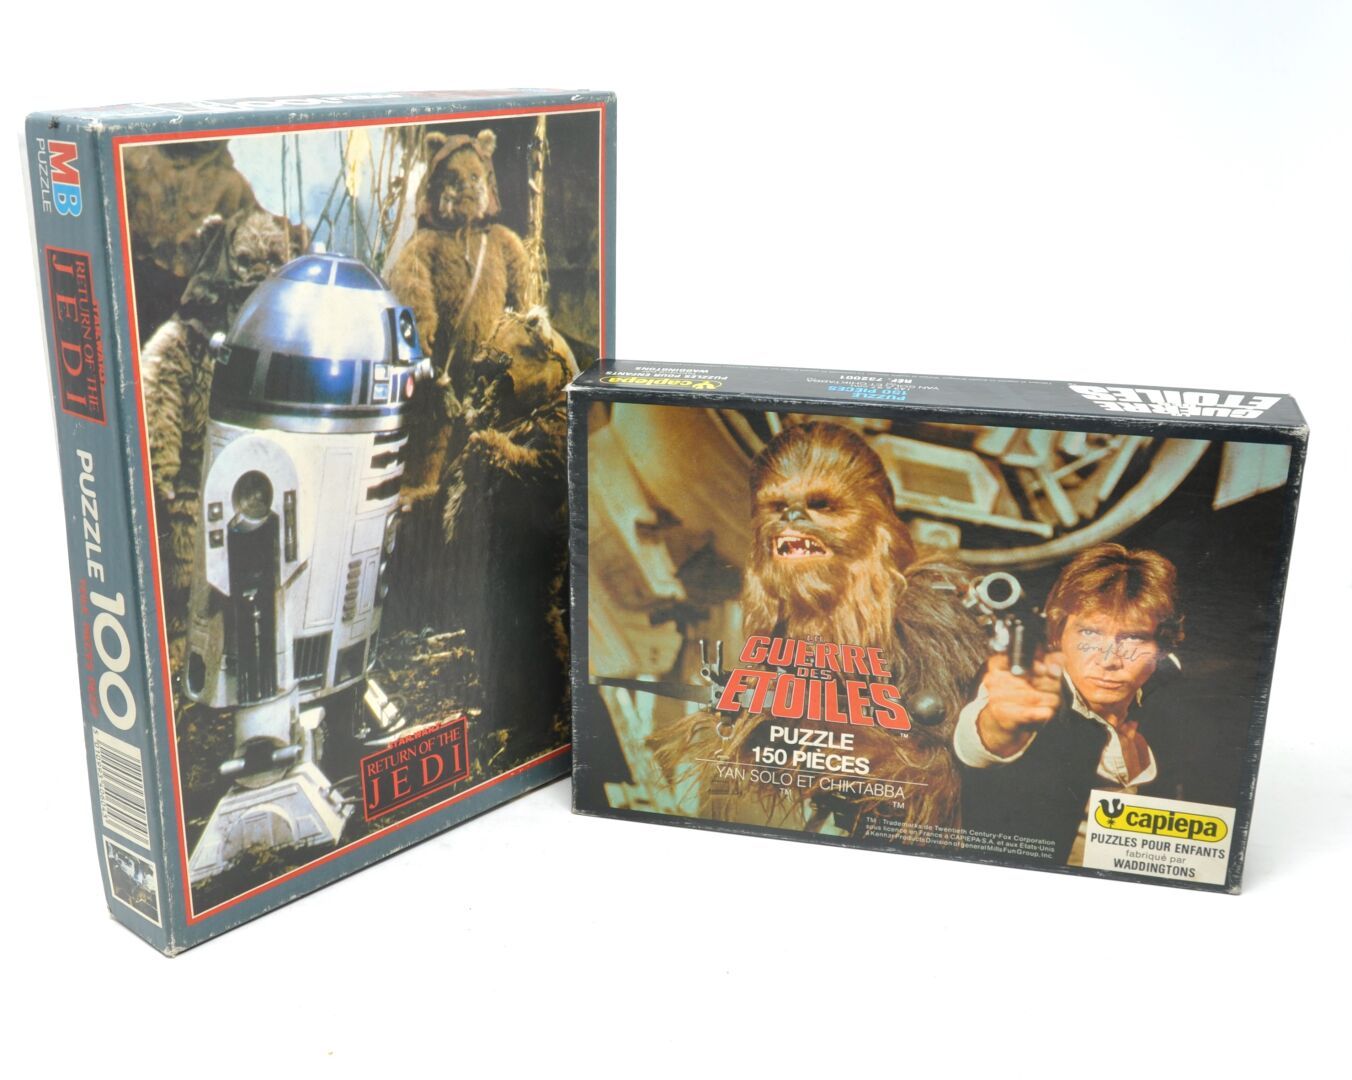 Null STAR WARS

Set of two jigsaw puzzles including 

-Star Wars, Yan Solo and C&hellip;